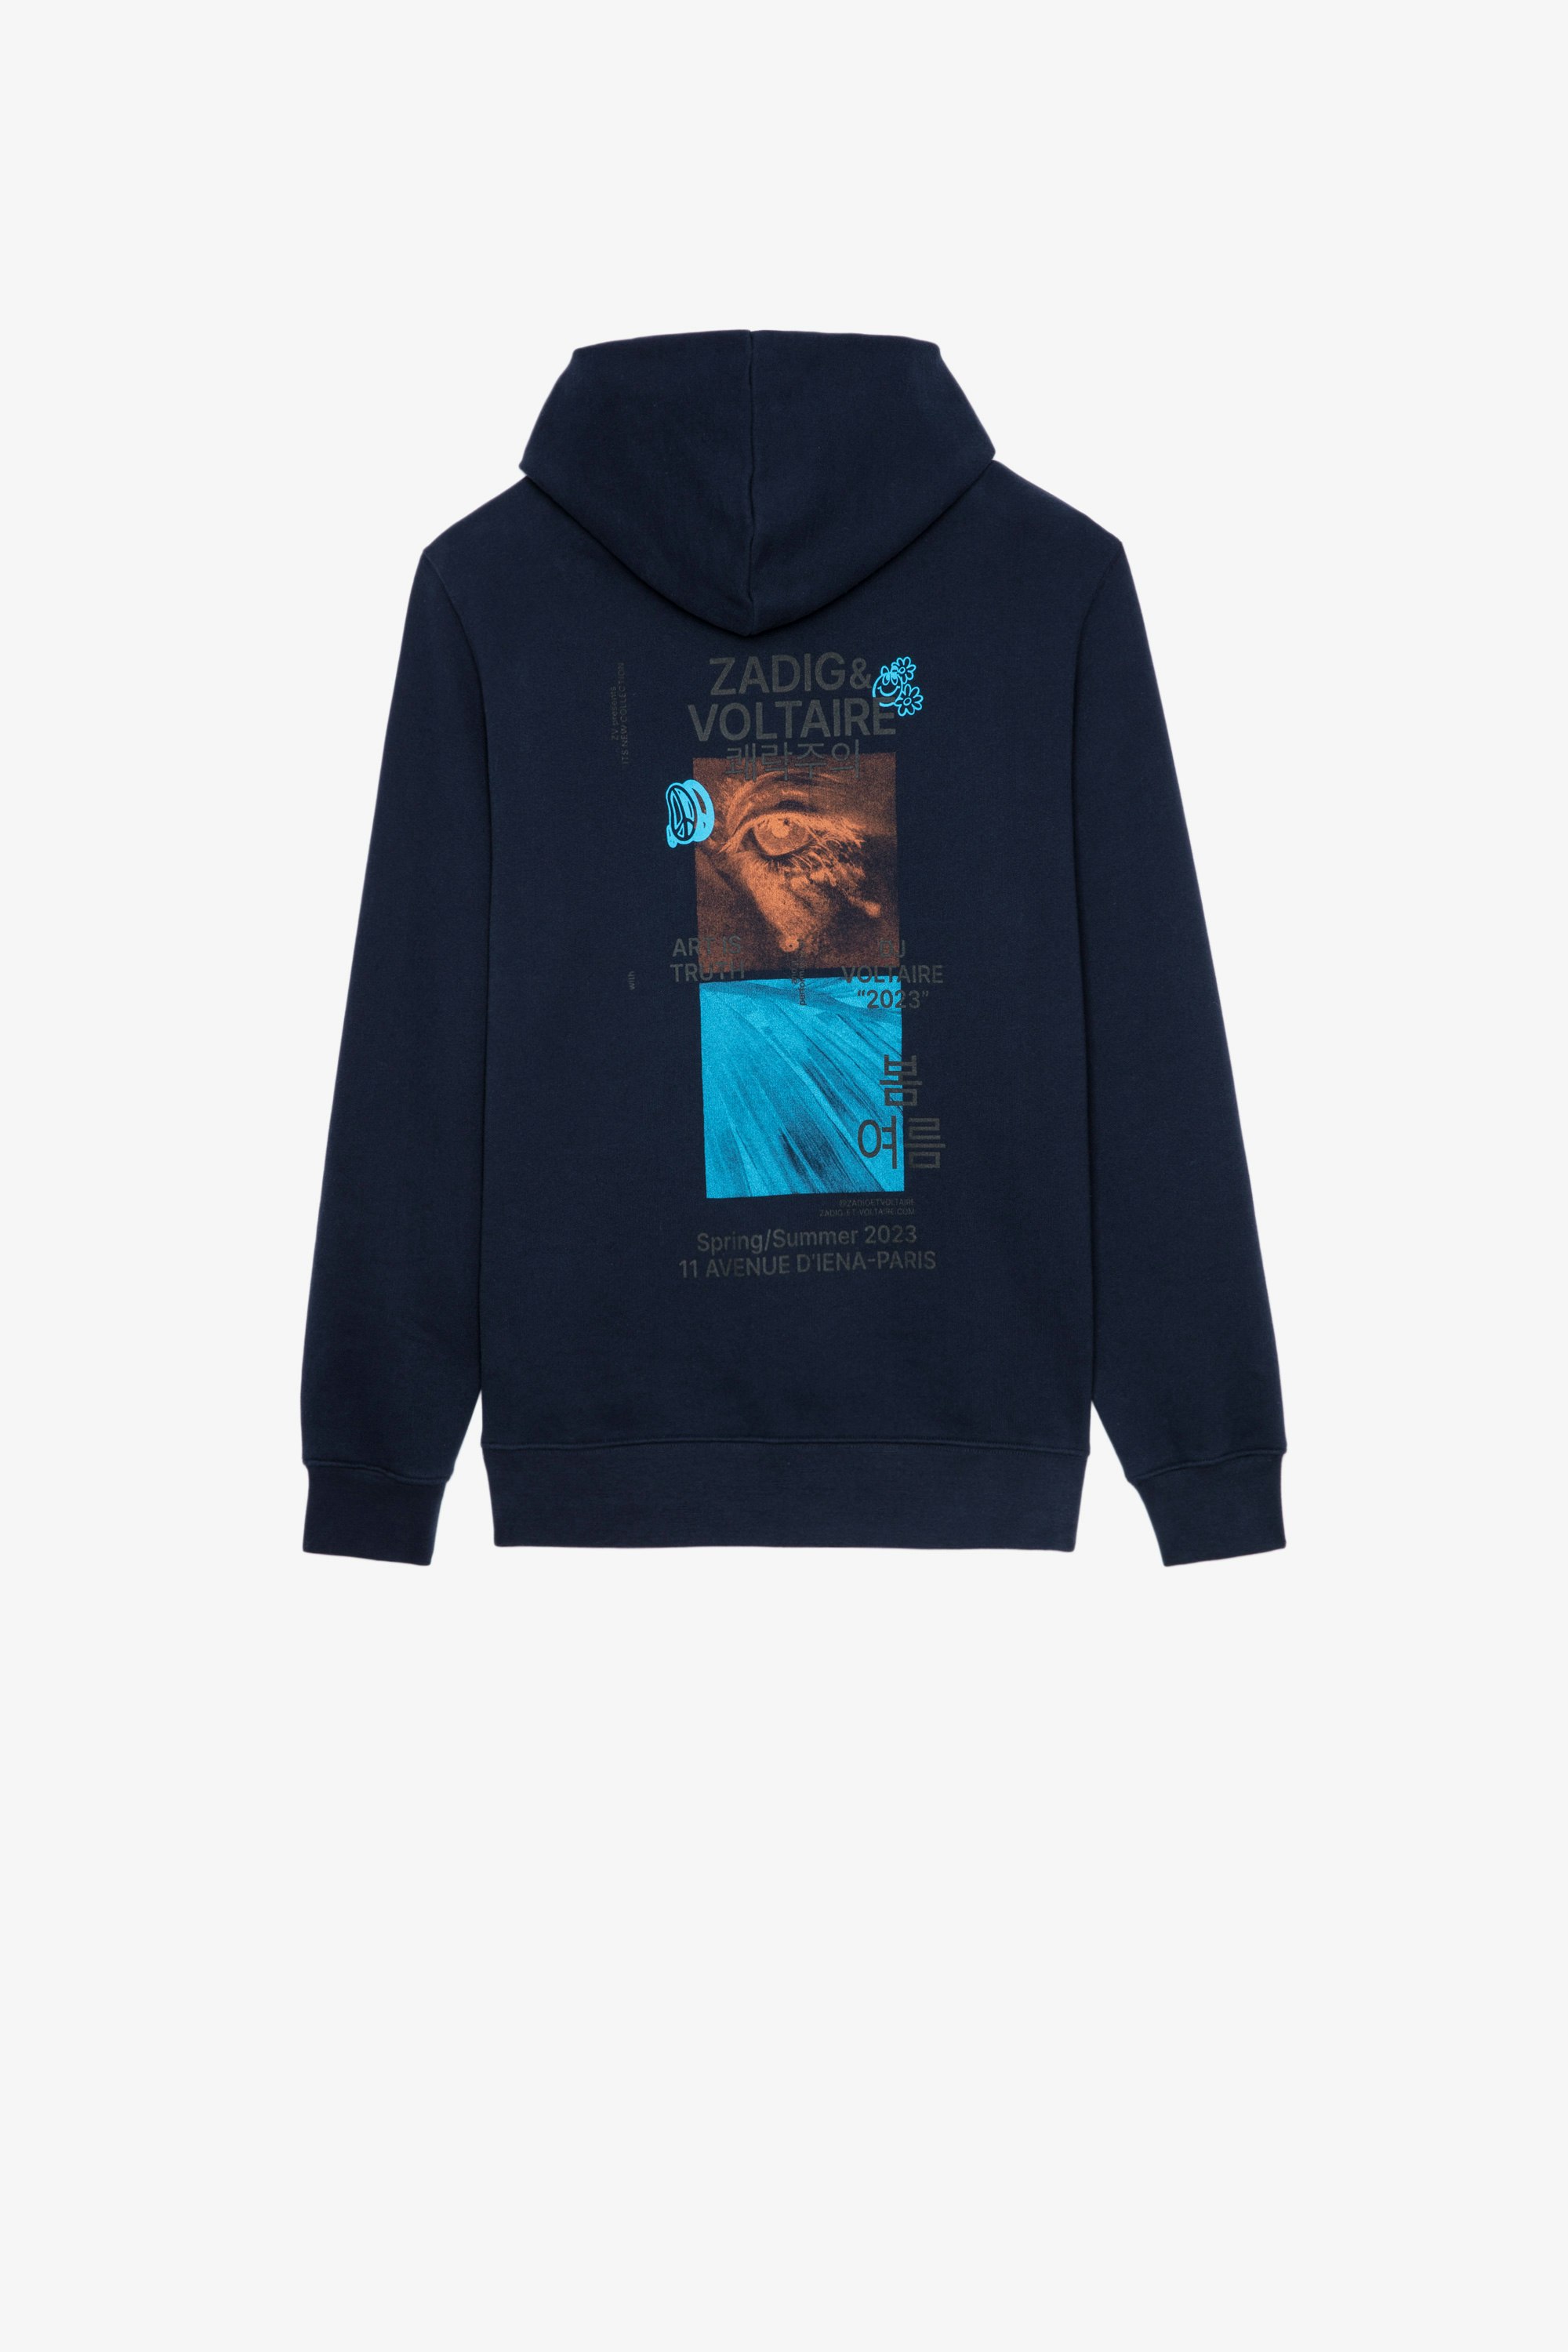 Sanchi Photoprint Sweatshirt Men’s navy-blue hoodie with motifs and a photoprint on the back